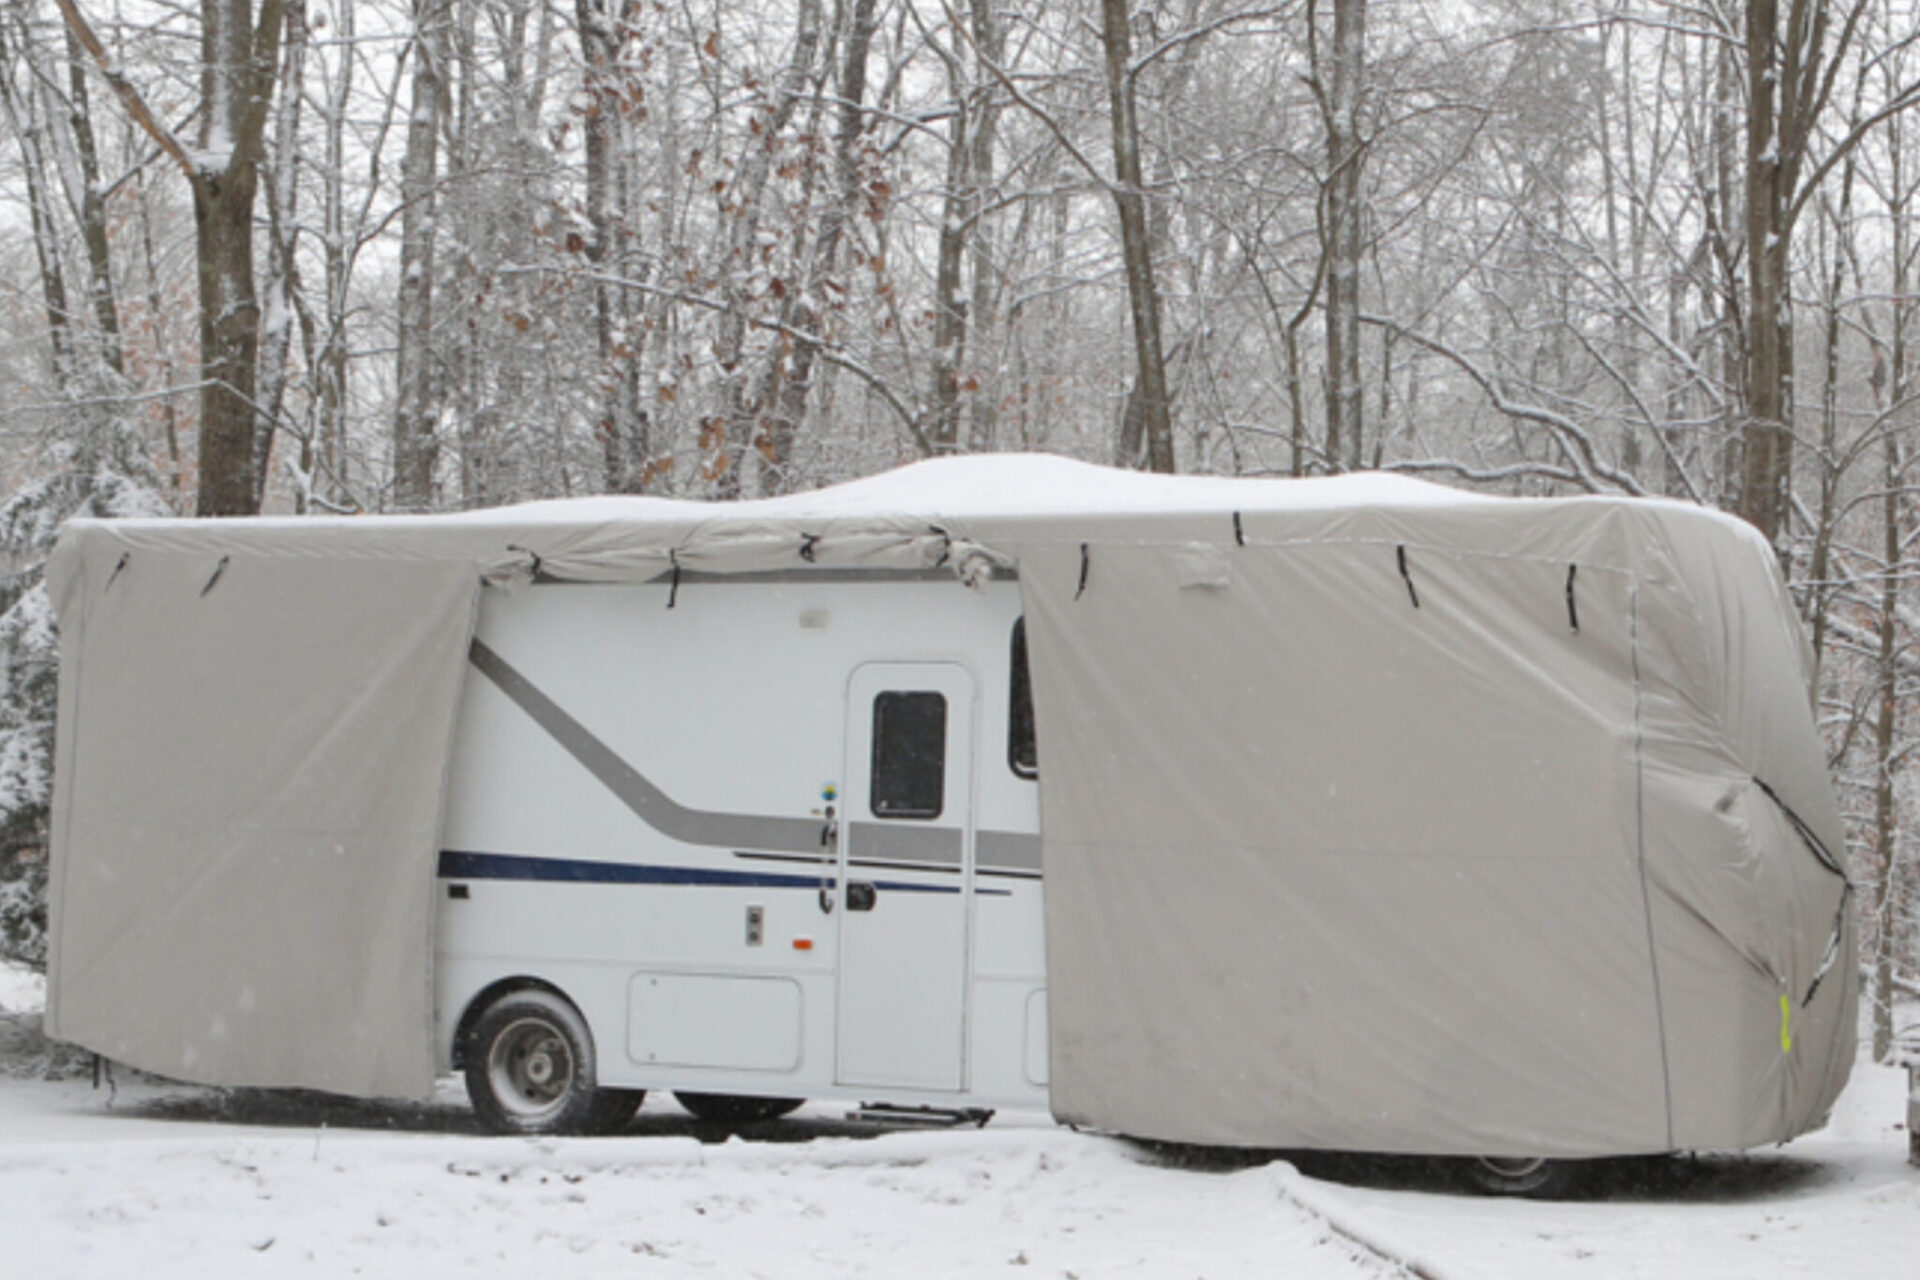 Episode 168 | Should You Cover an RV in Storage?